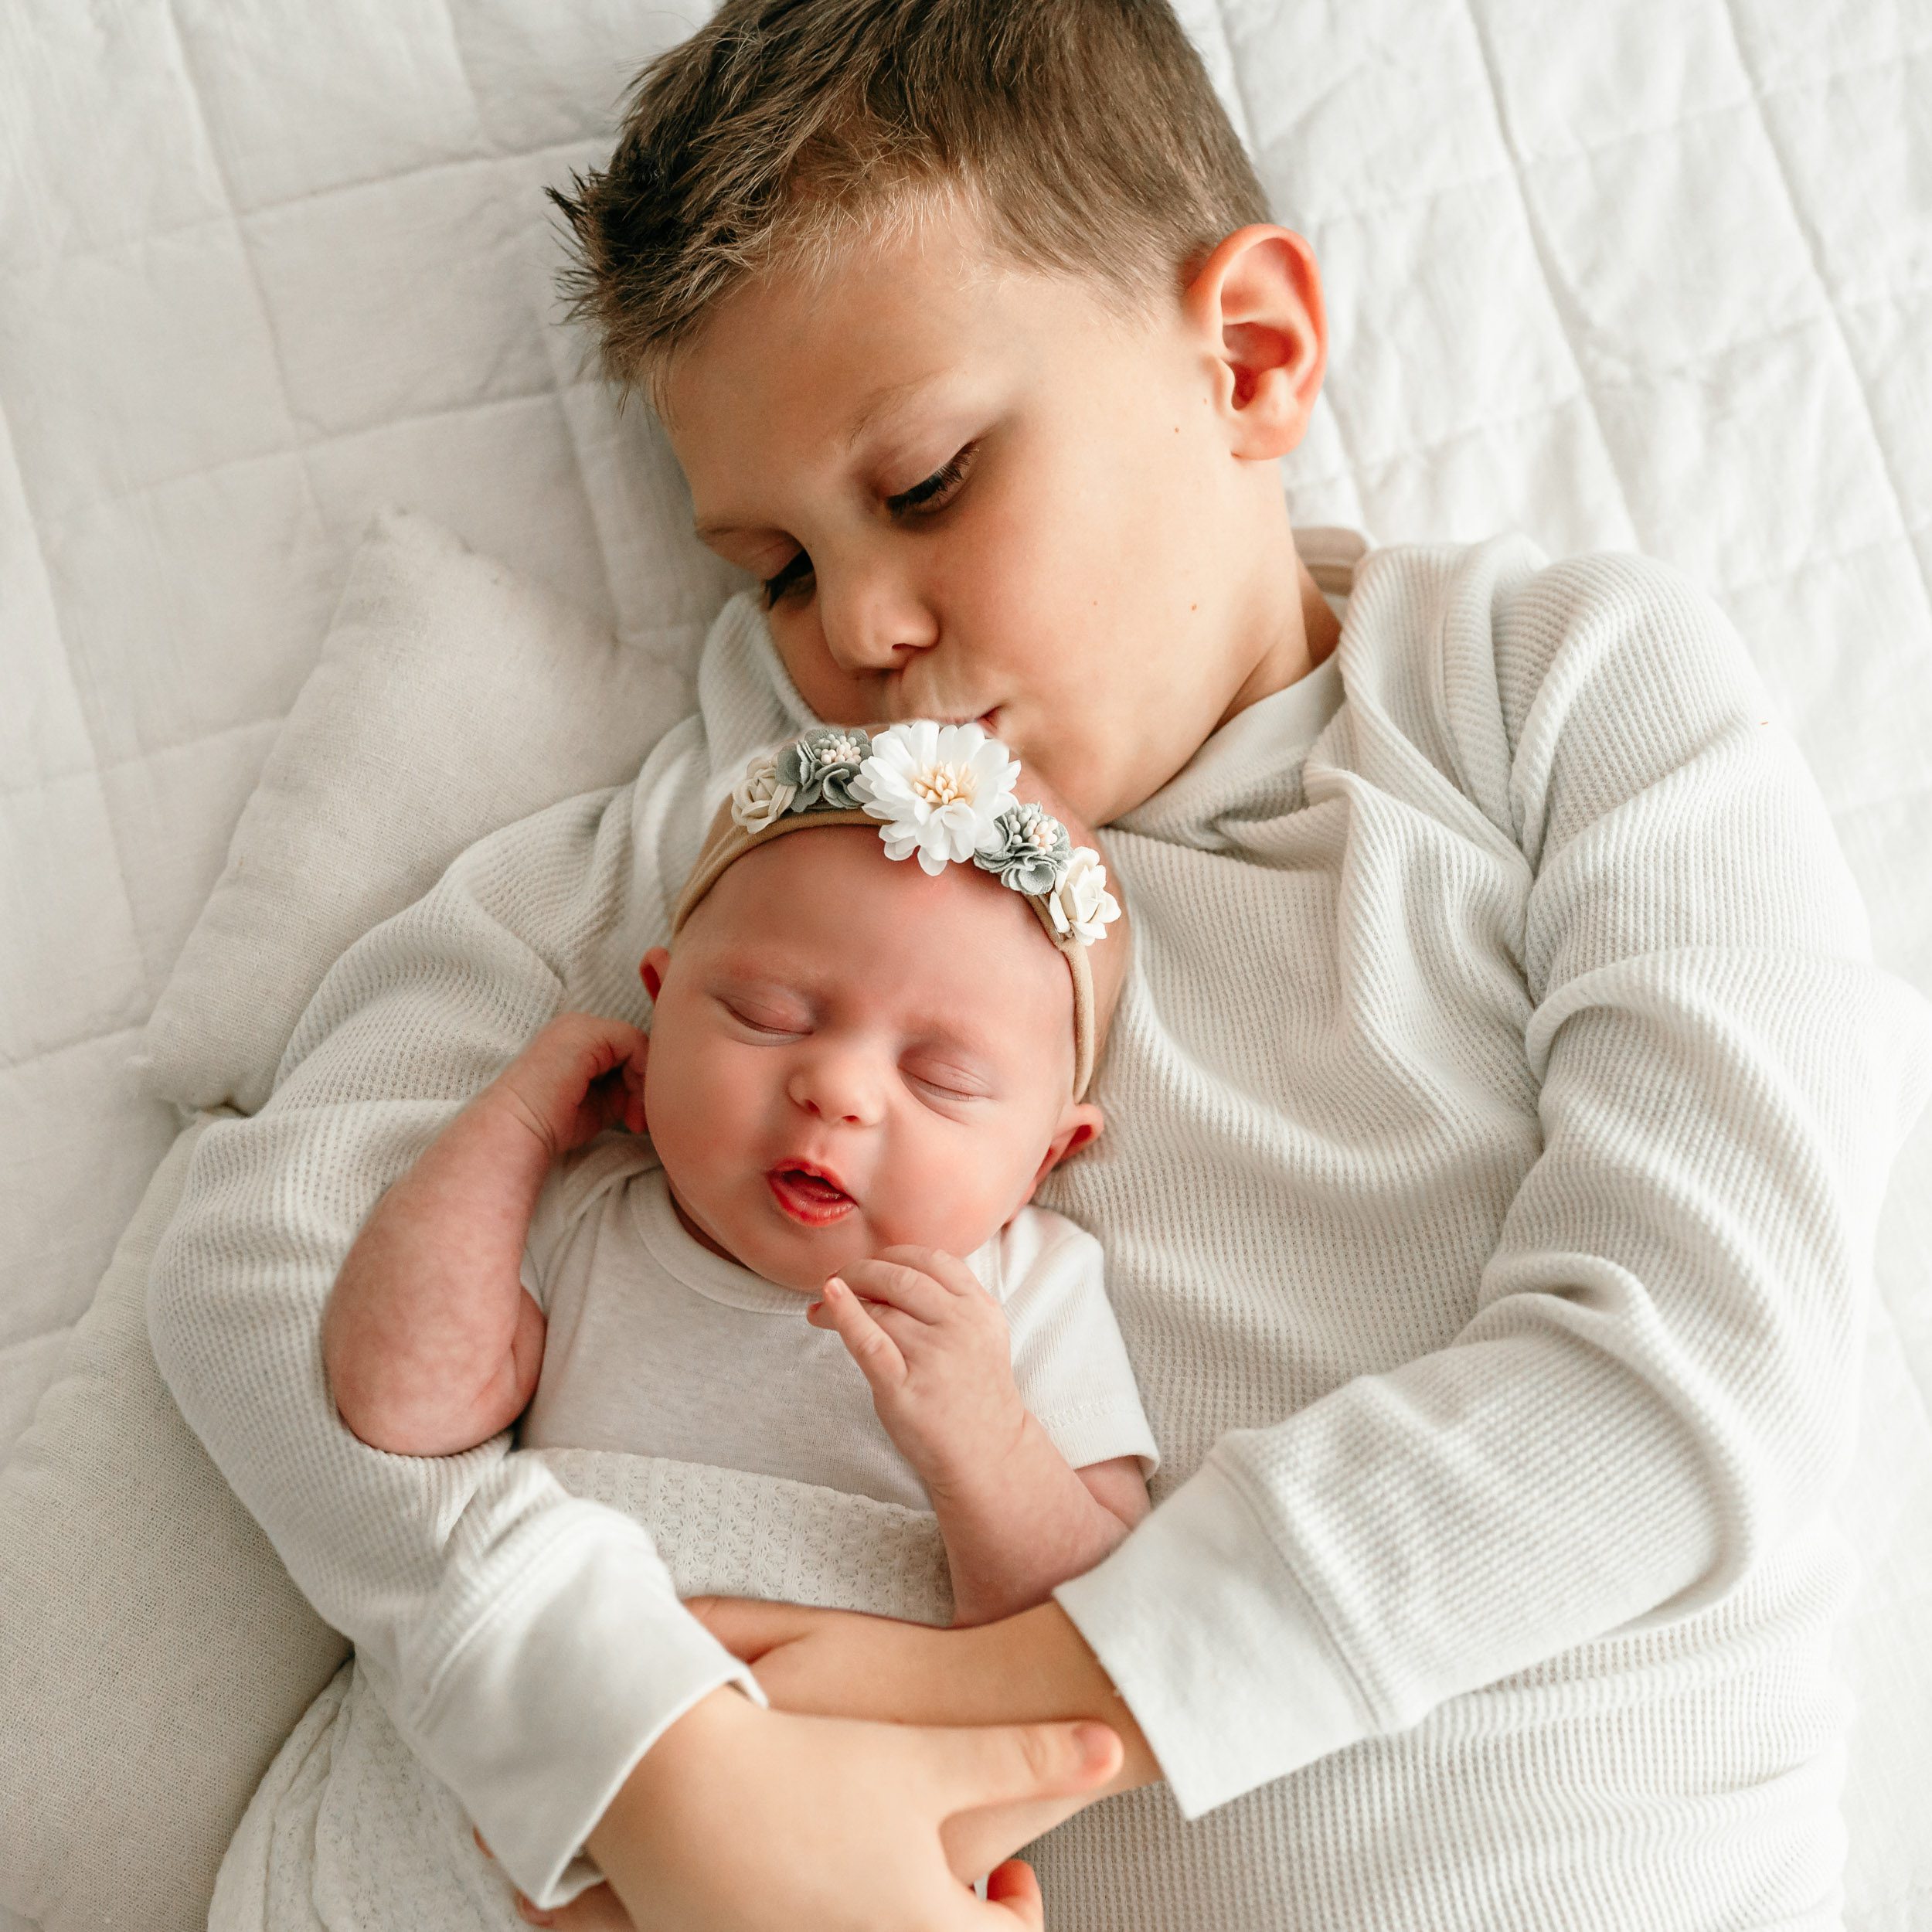 an older brother laying on a bed and kissing his baby sister on the head during a natural light newborn photo session